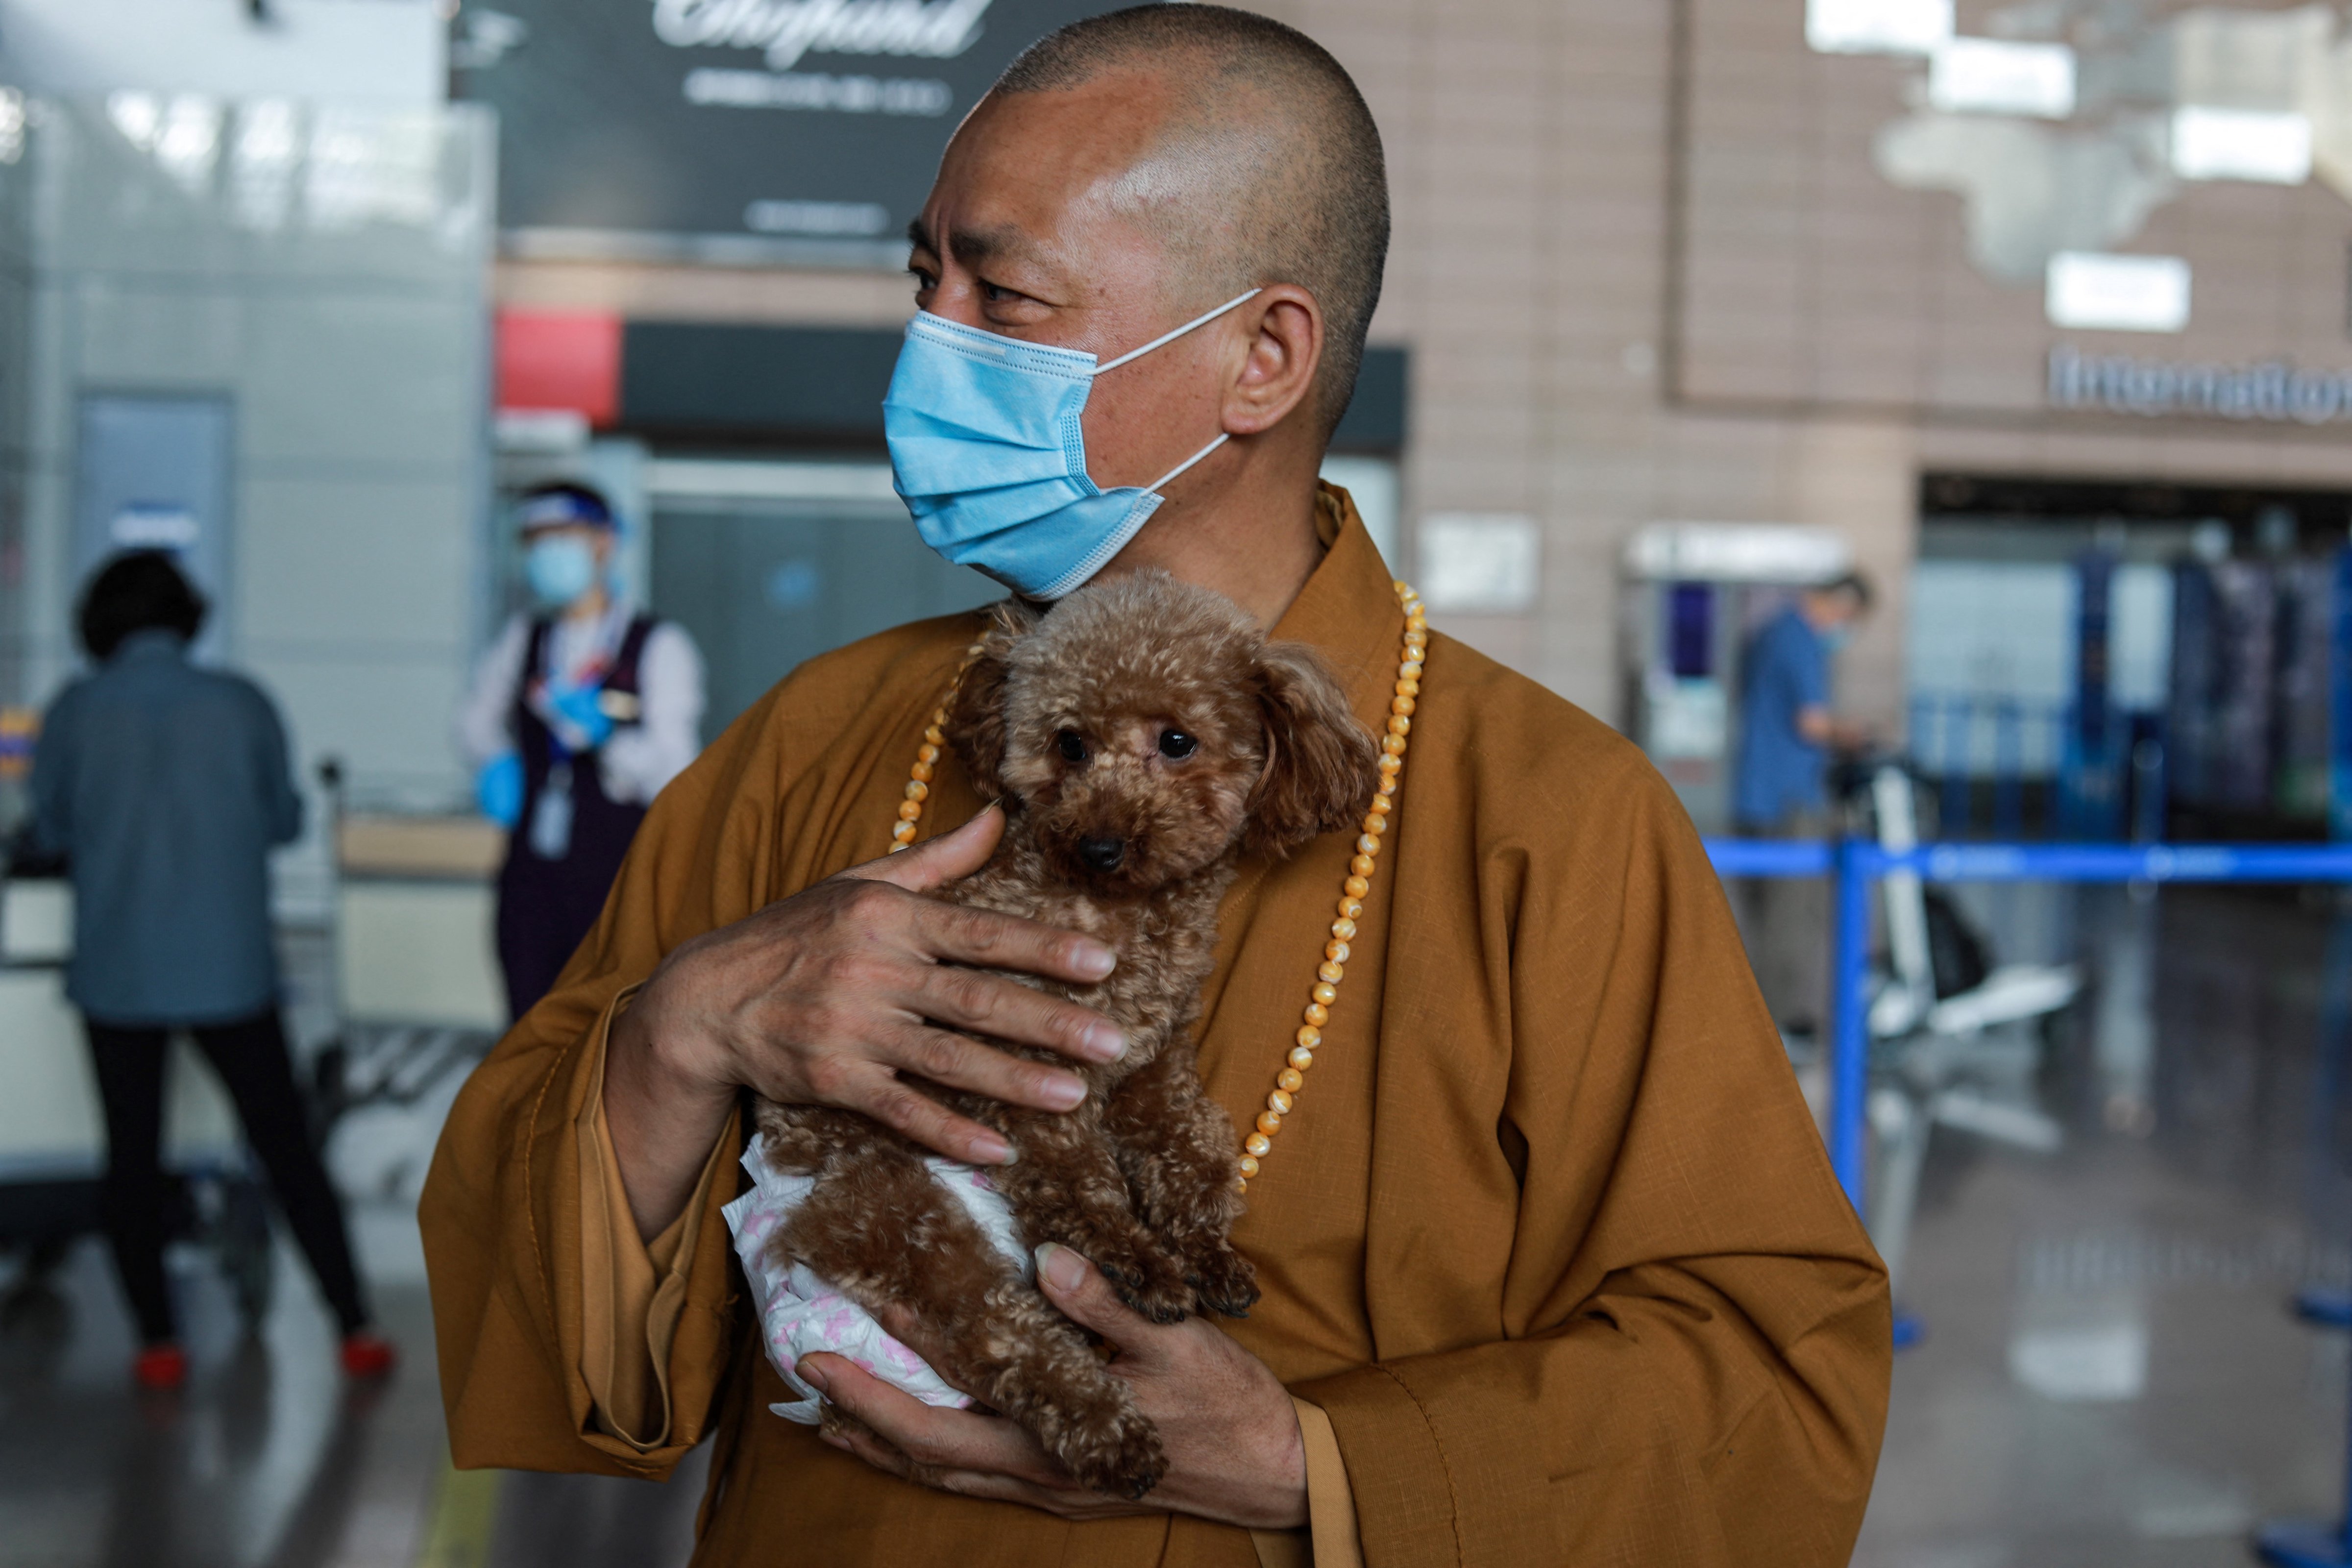 Zhi Xiang, a Buddhist monk who helps care for and find homes for stray animals in China, carries a dog destined for a home in the U.S. at the airport in Shanghai, on May 26, 2021. New CDC rules have made it harder to transport dogs into the United States. (Jessica Yang—AFP/Getty Images)